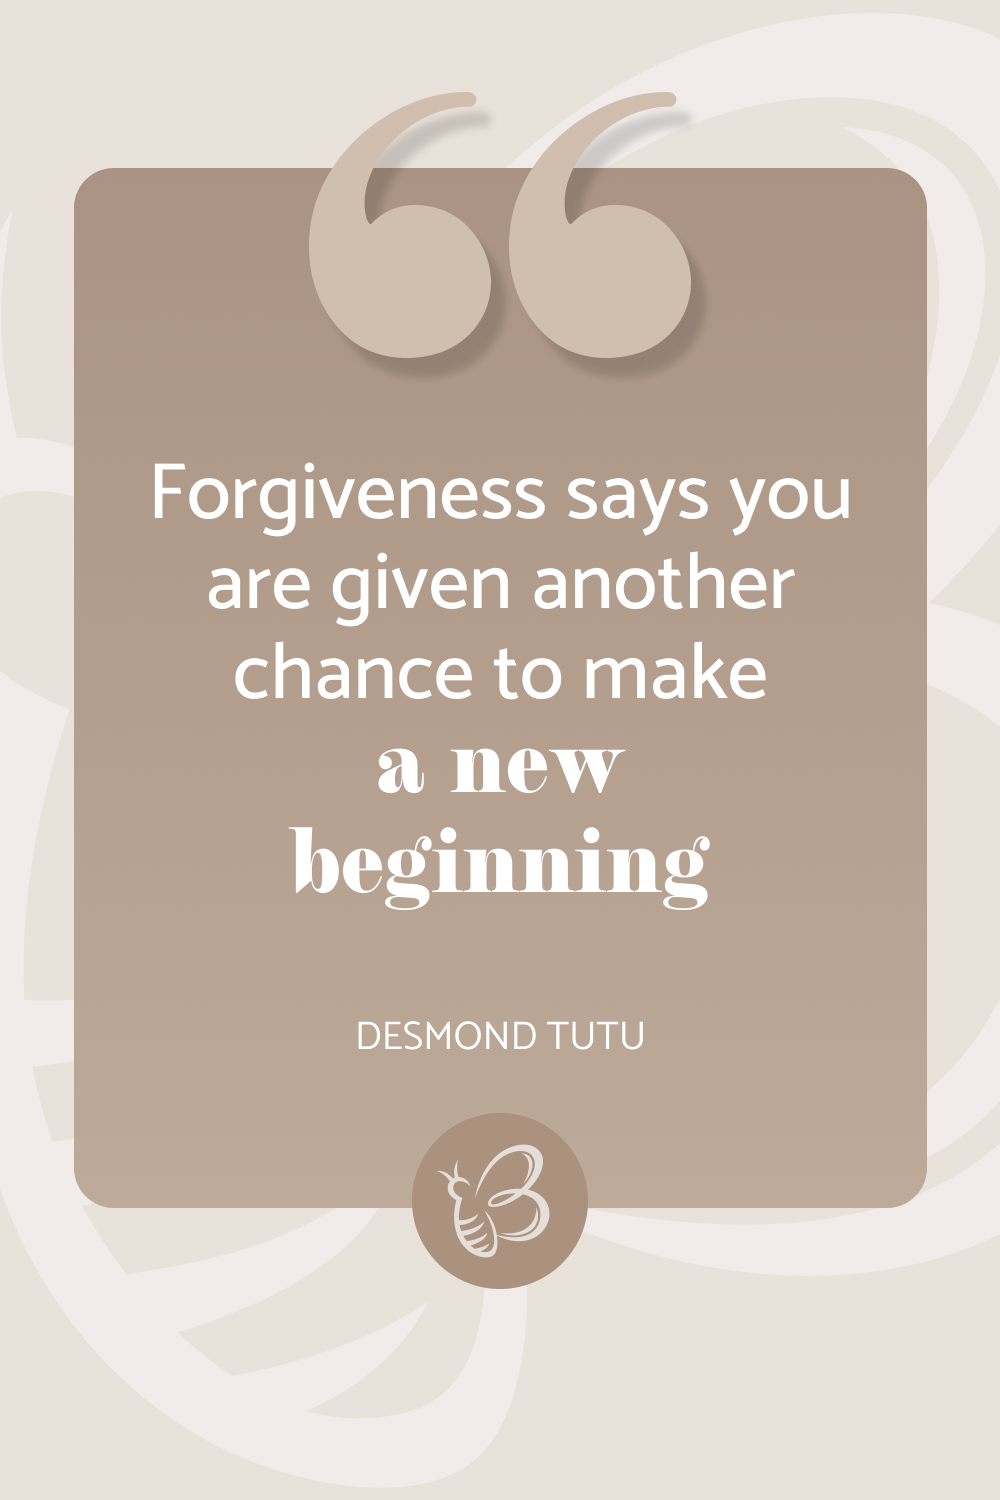 Forgiveness says you are given another chance to make a new beginning – Desmond Tutu